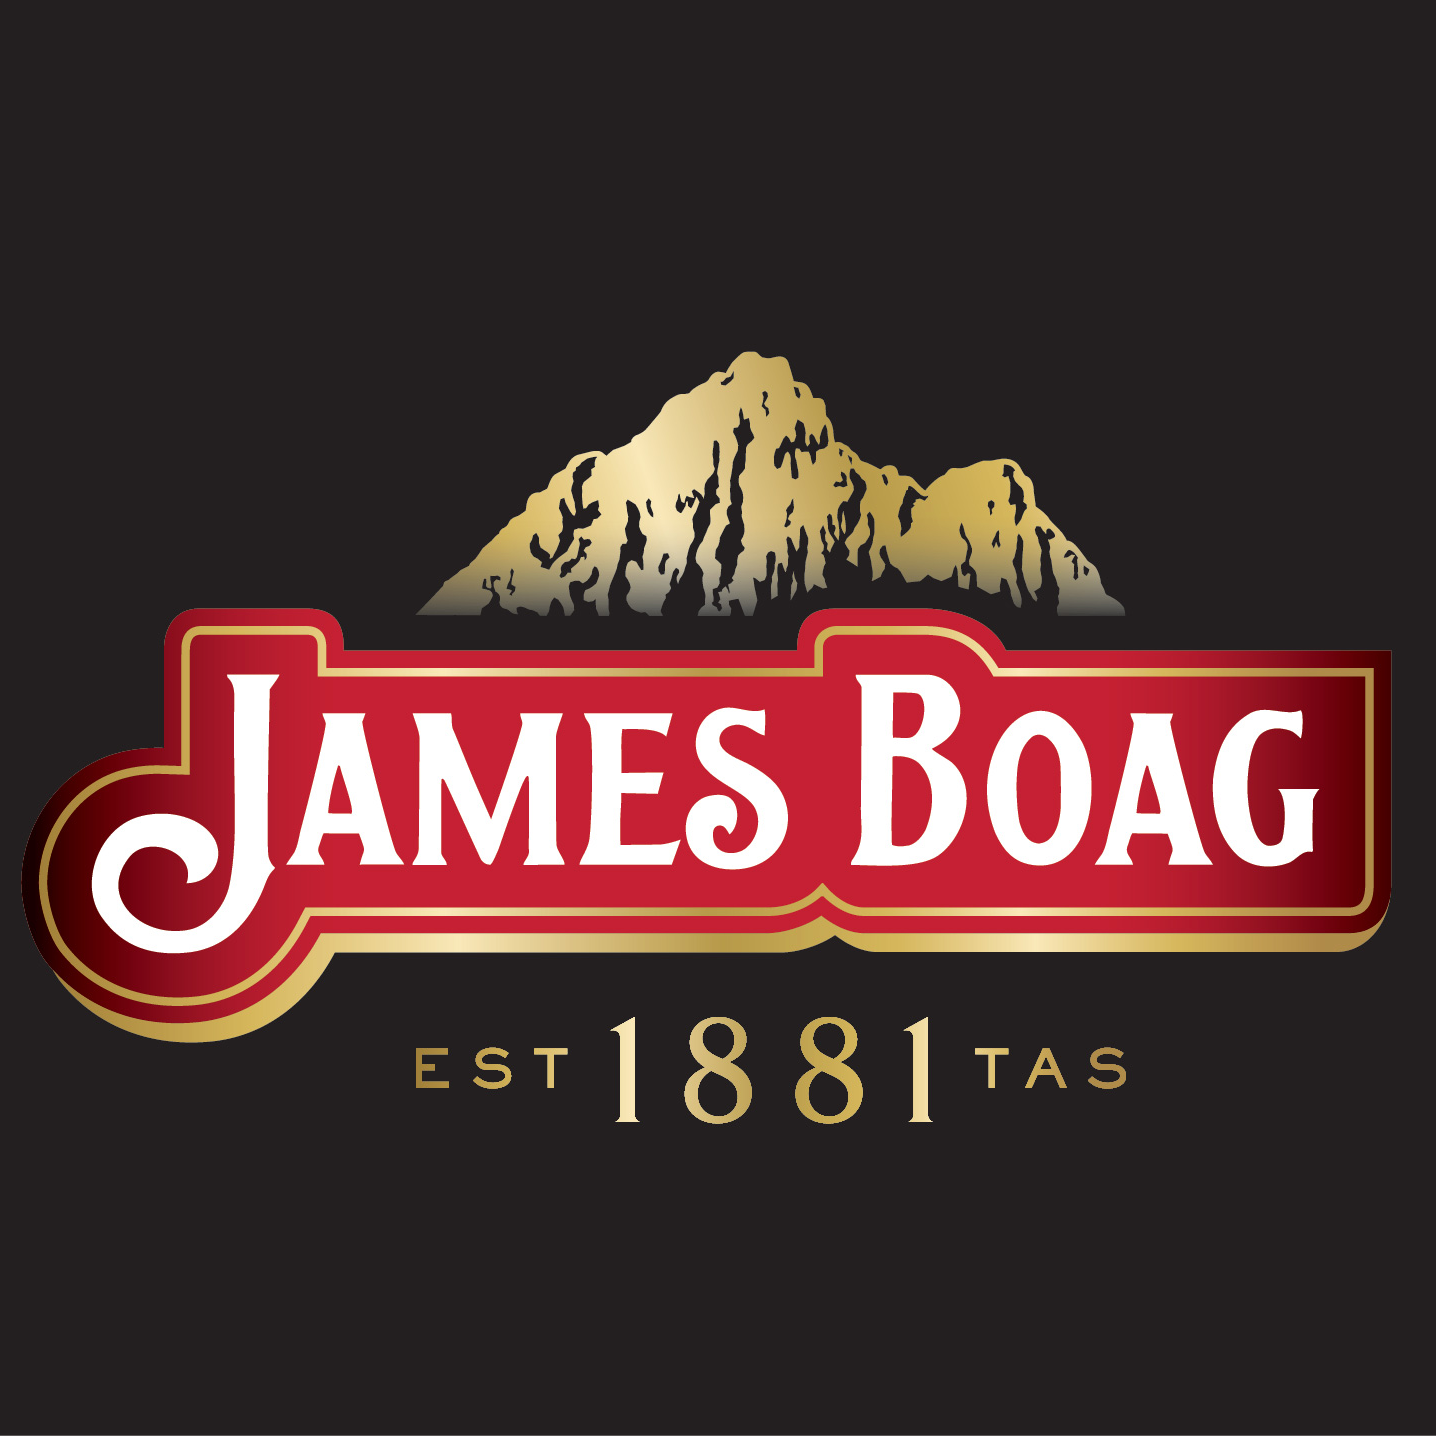 James Boag’s Brewery